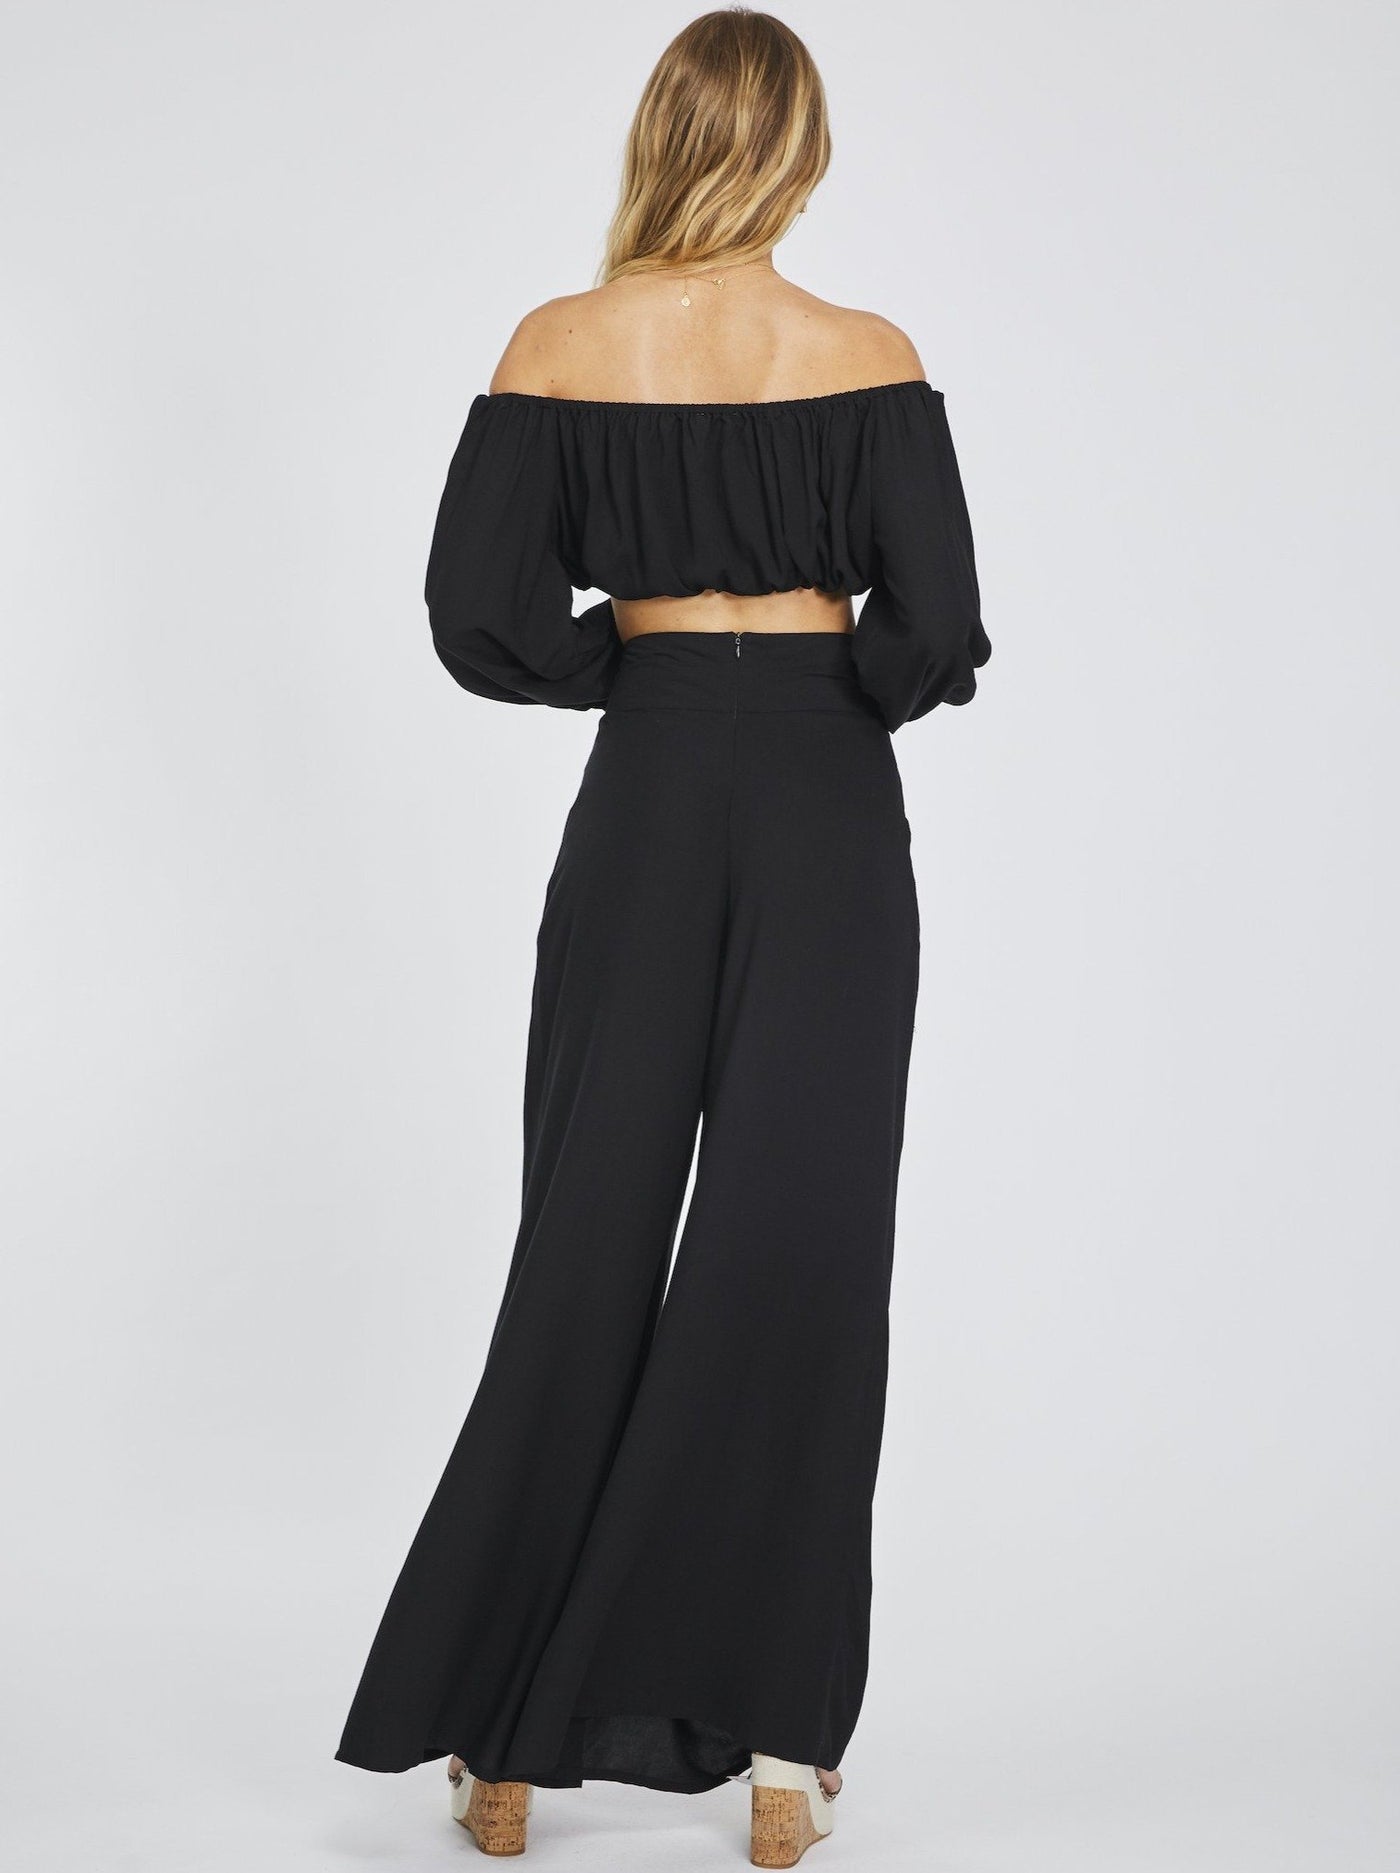 Black Palazzo Leg pants, Side Pockets, Wide Waist Panel, Inverted Pleats Under Waist Panel, Invisible Centre Back Zipper, Hook And Eye At Top Of Zipper, 100% rayon, designed in Australia